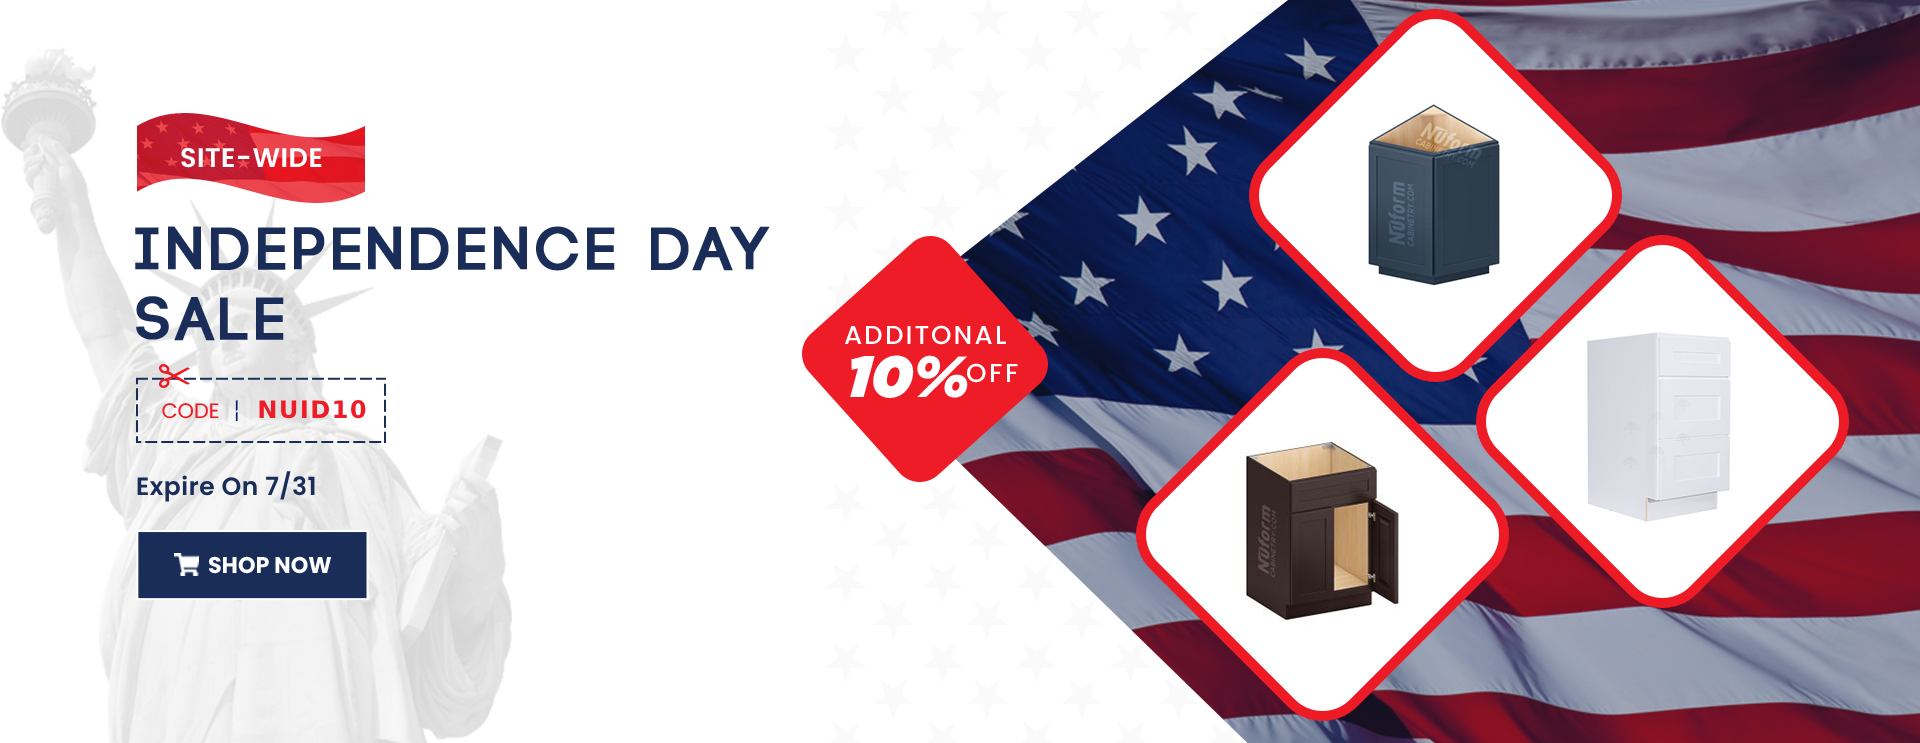 Independent Day Sale